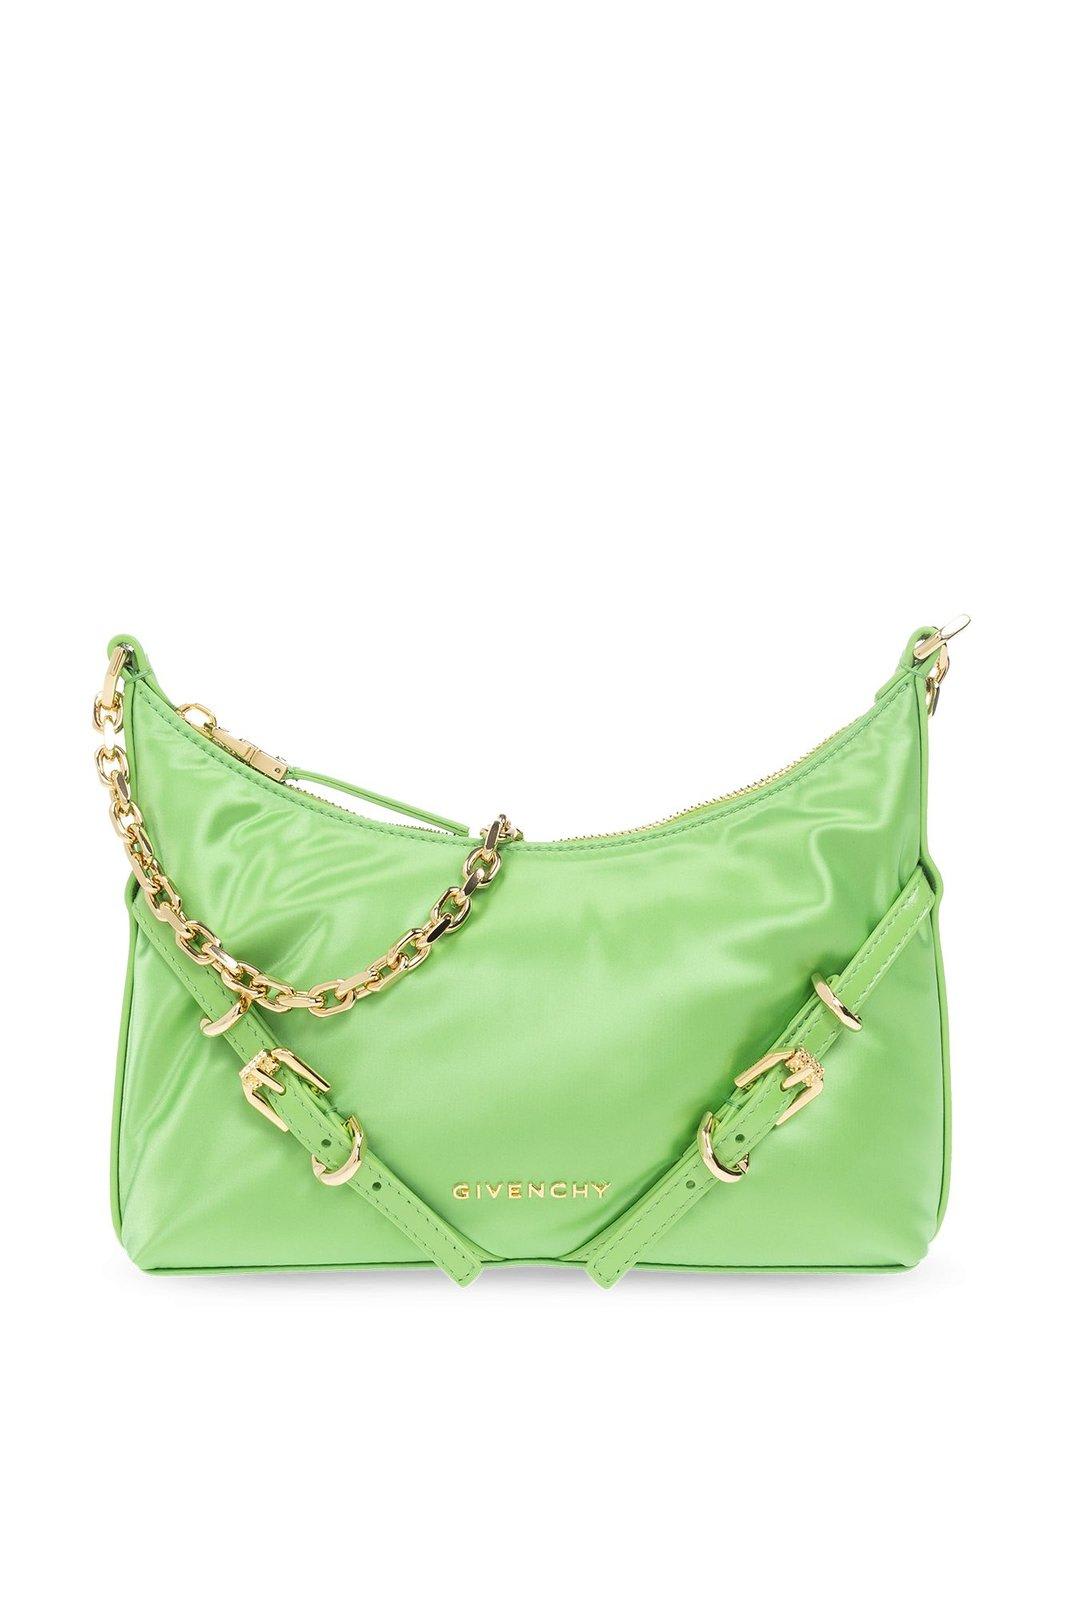 Givenchy Voyou Party Shoulder Bag In Absynthegreen